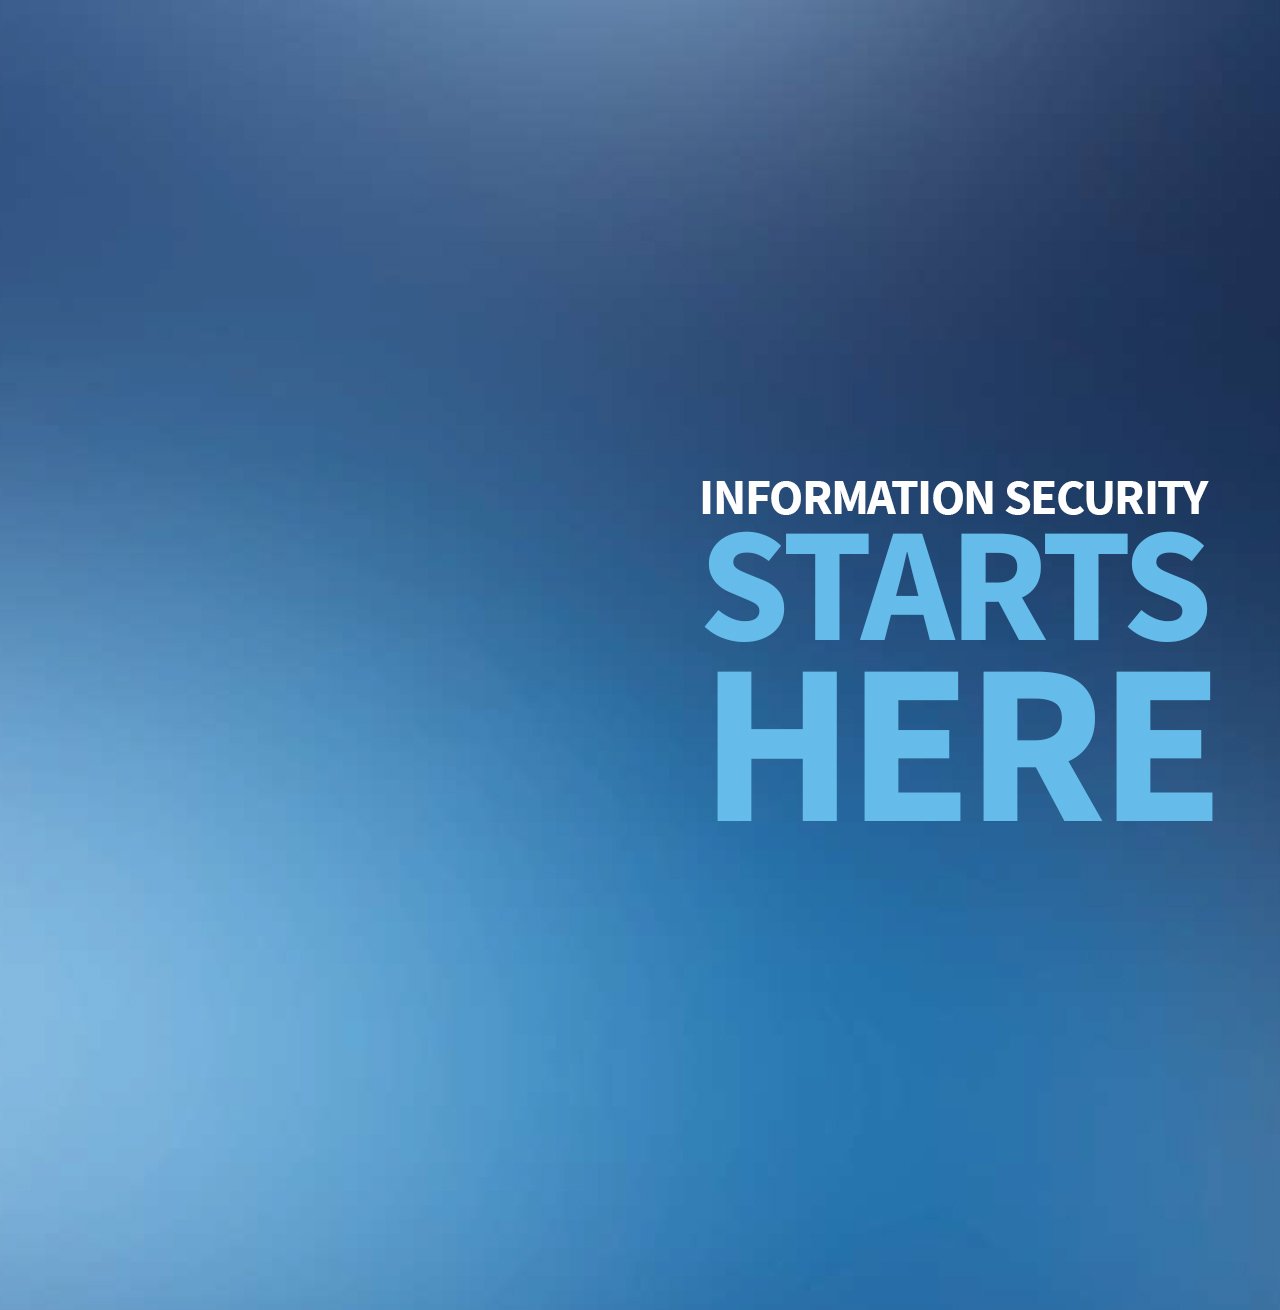 Information Security Starts Here